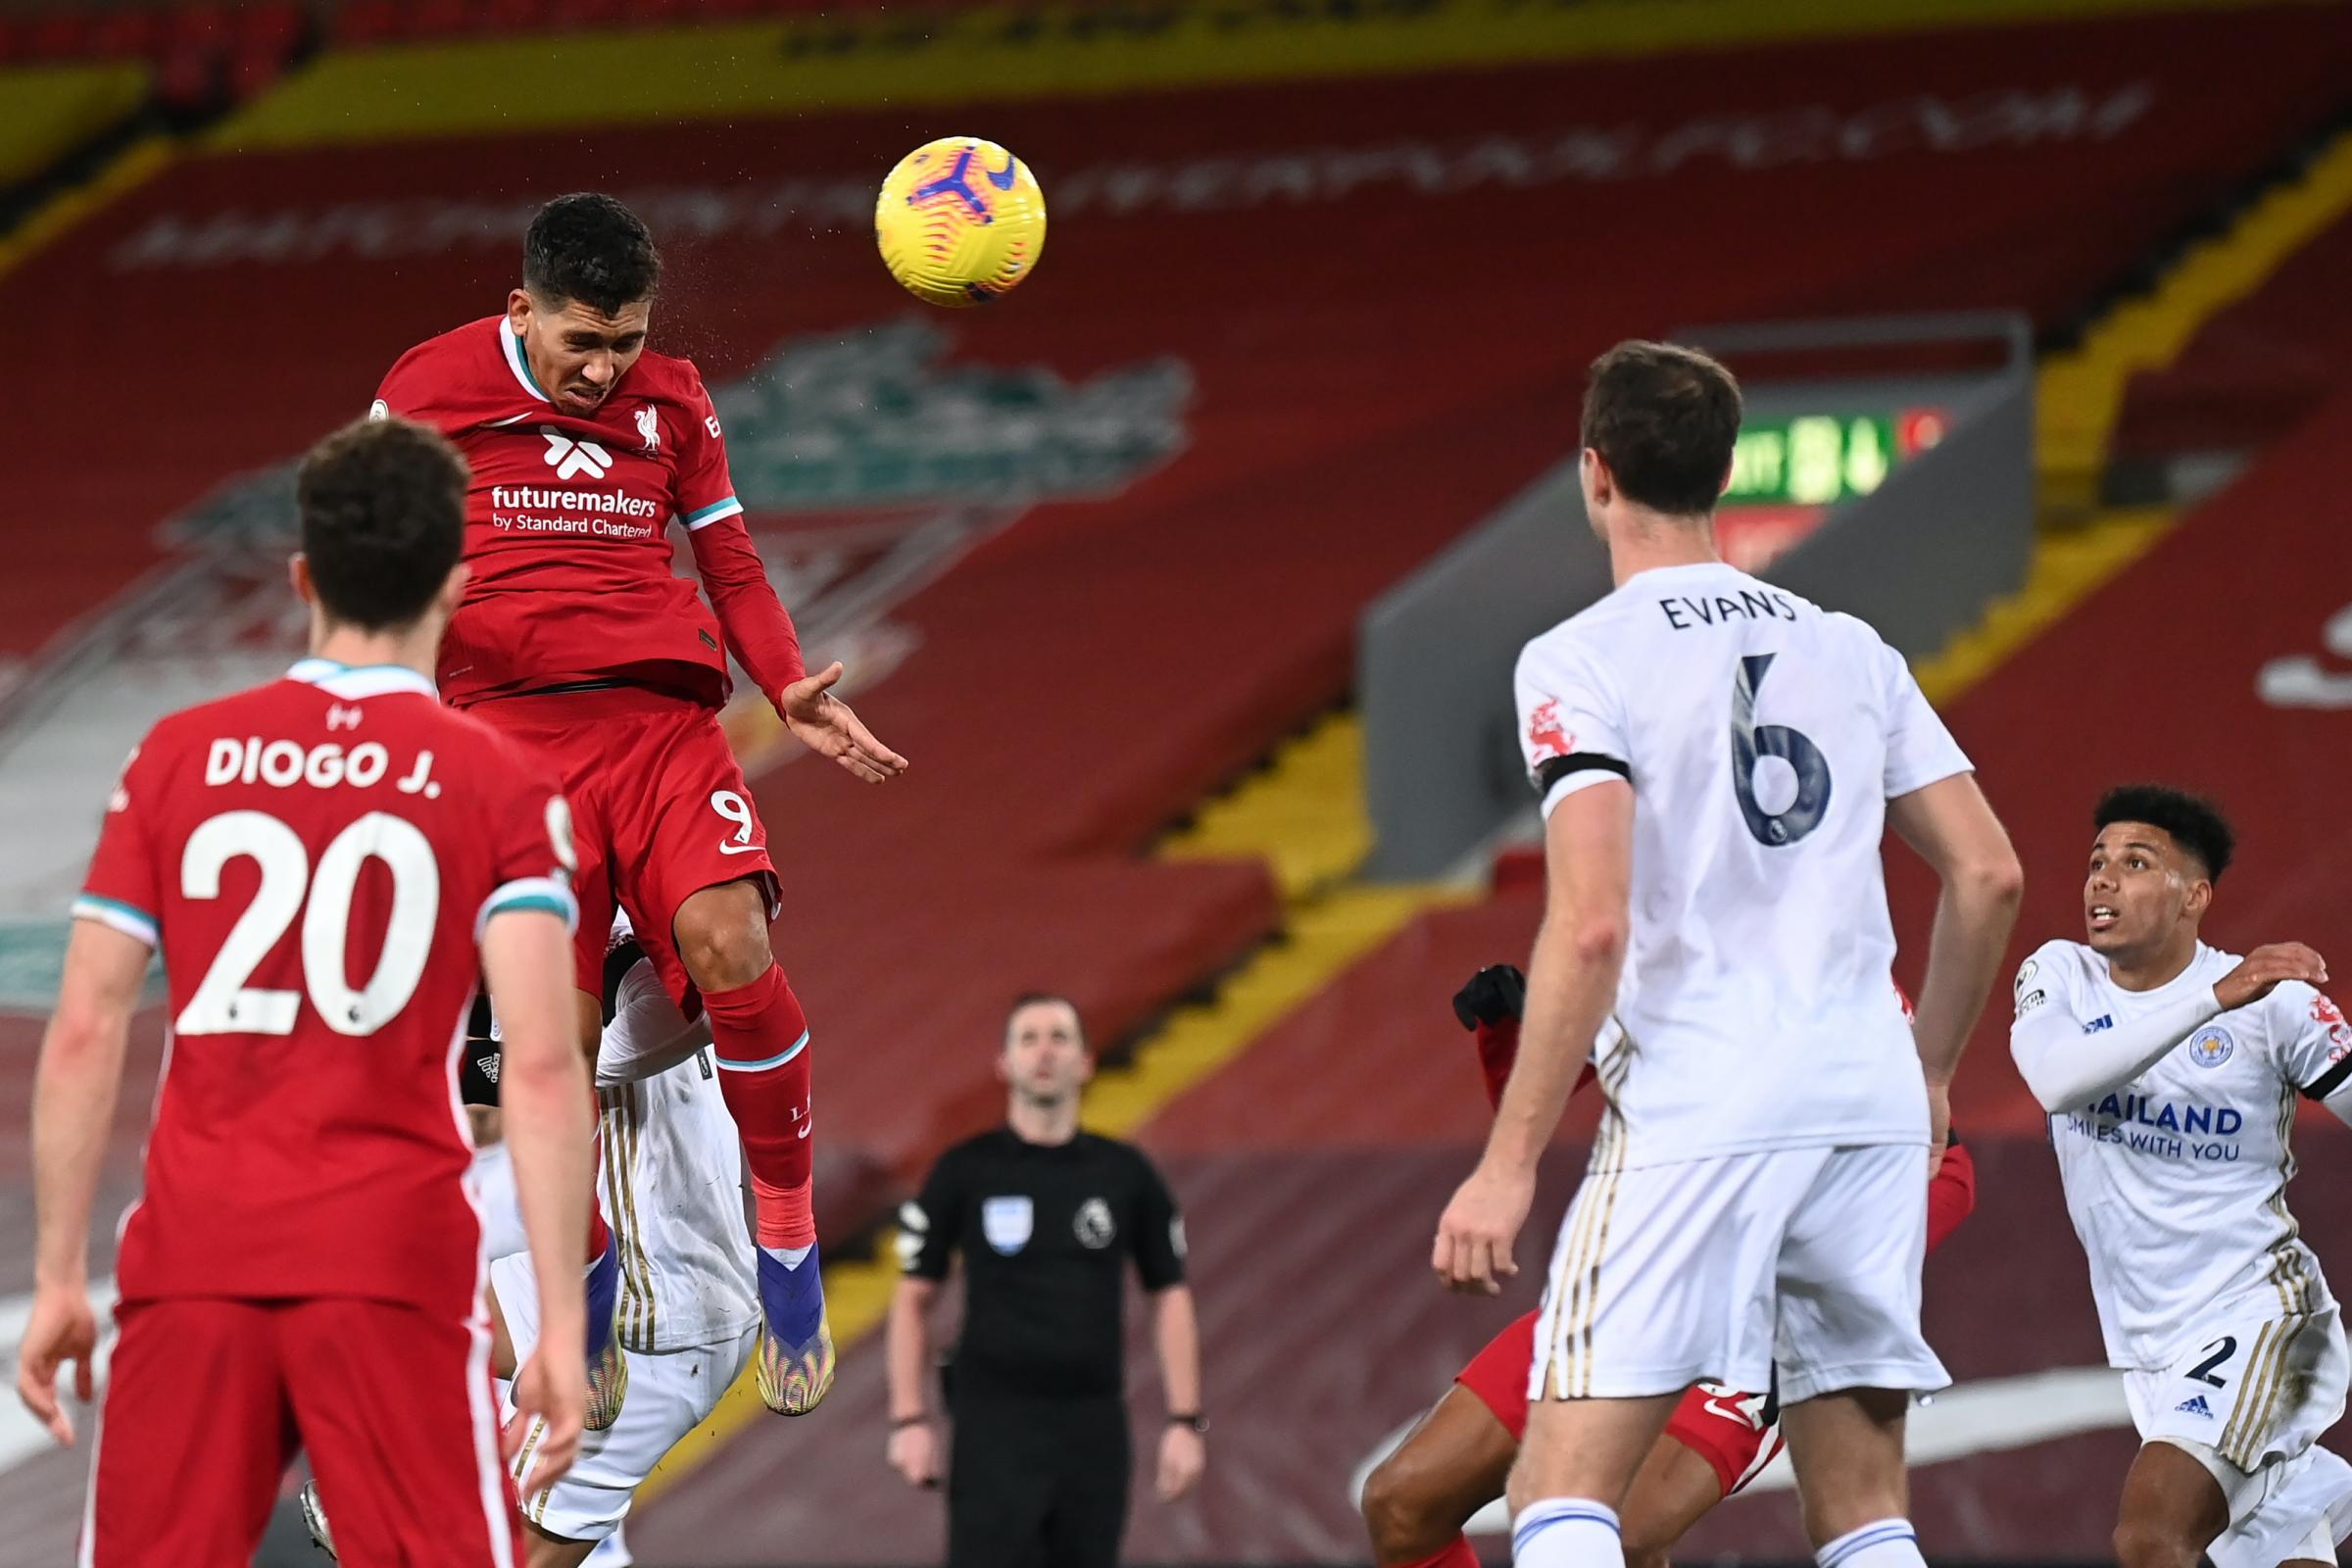 Diogo Jota stars and records tumble as Liverpool brush aside Leicester at  Anfield | Lancashire Telegraph